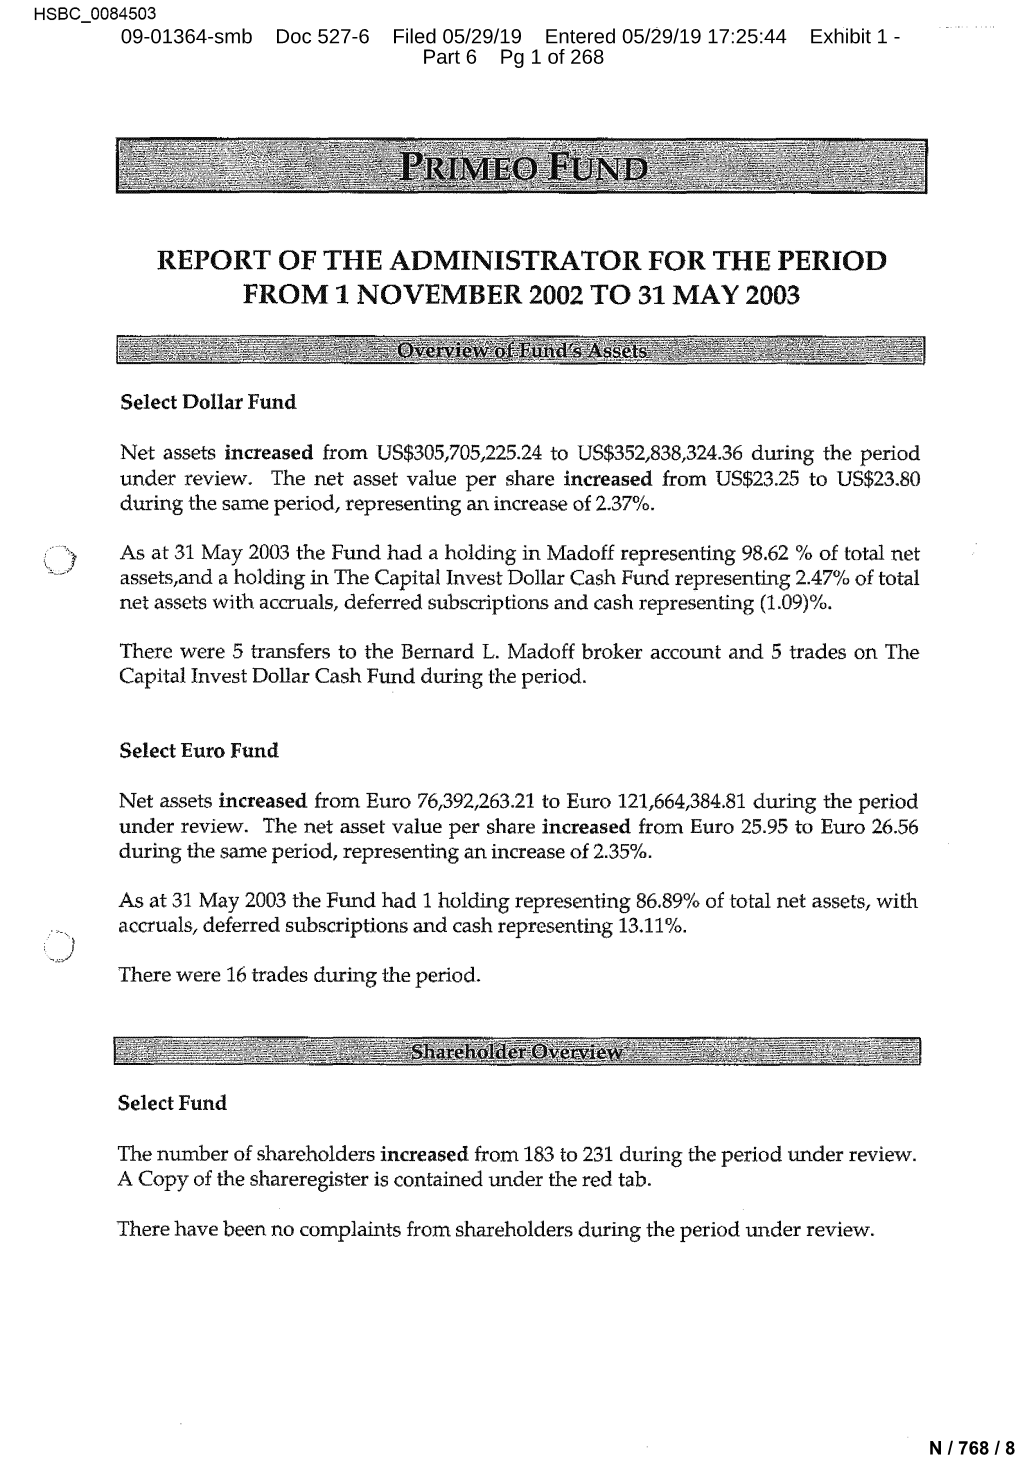 Report of the Administrator for the Period from 1 November 2002 to 31 May 2003